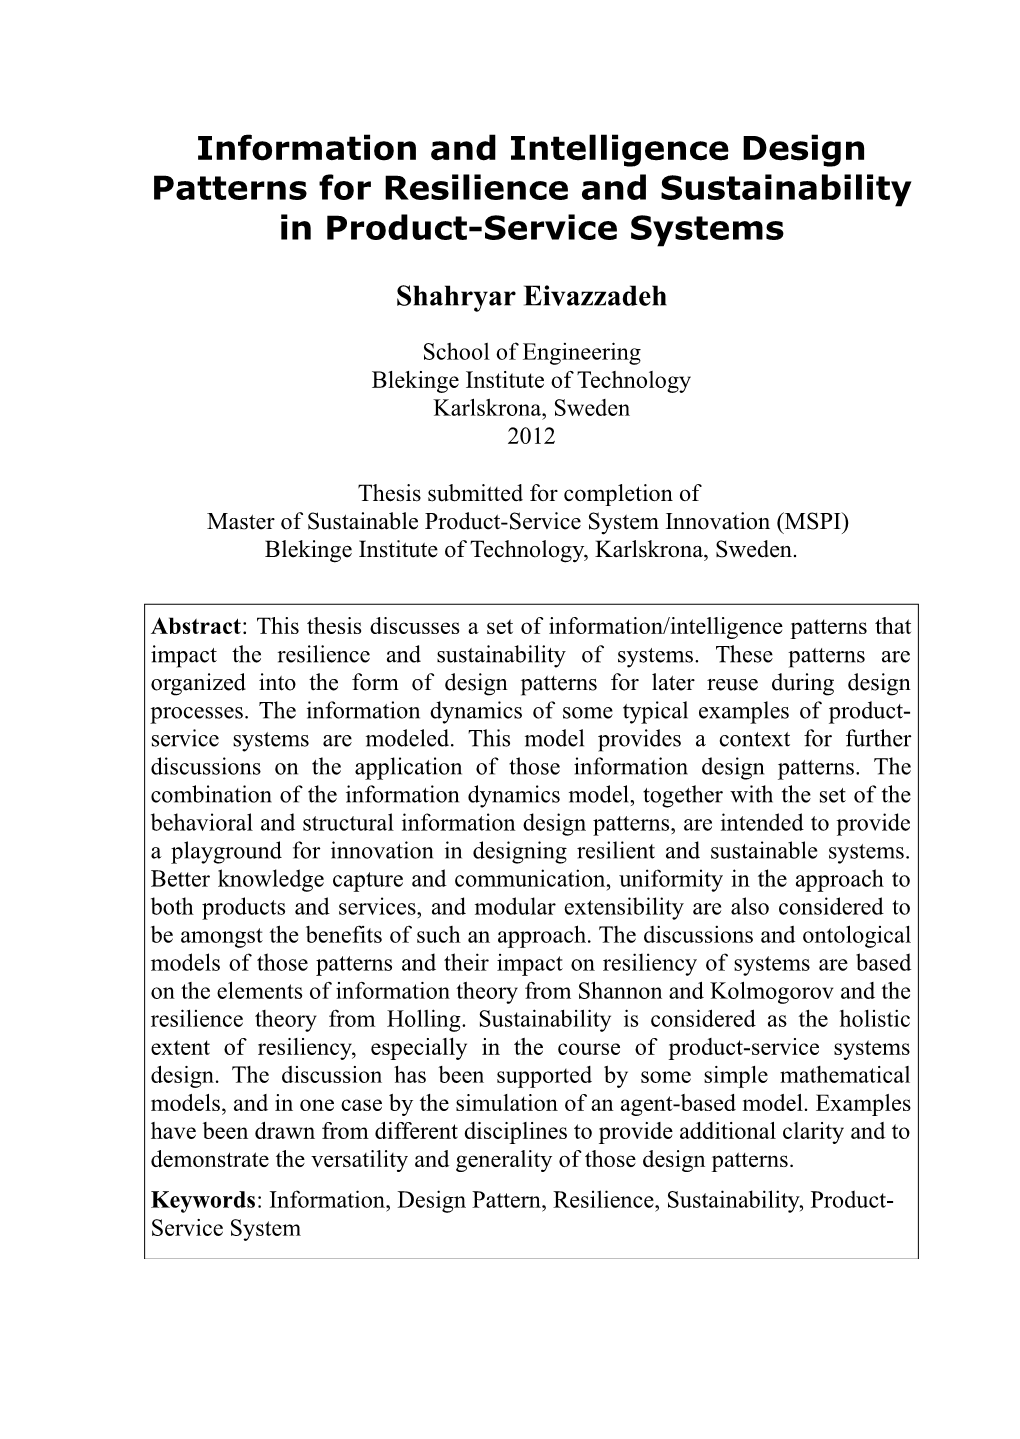 Information and Intelligence Design Patterns for Resilience and Sustainability in Product-Service Systems